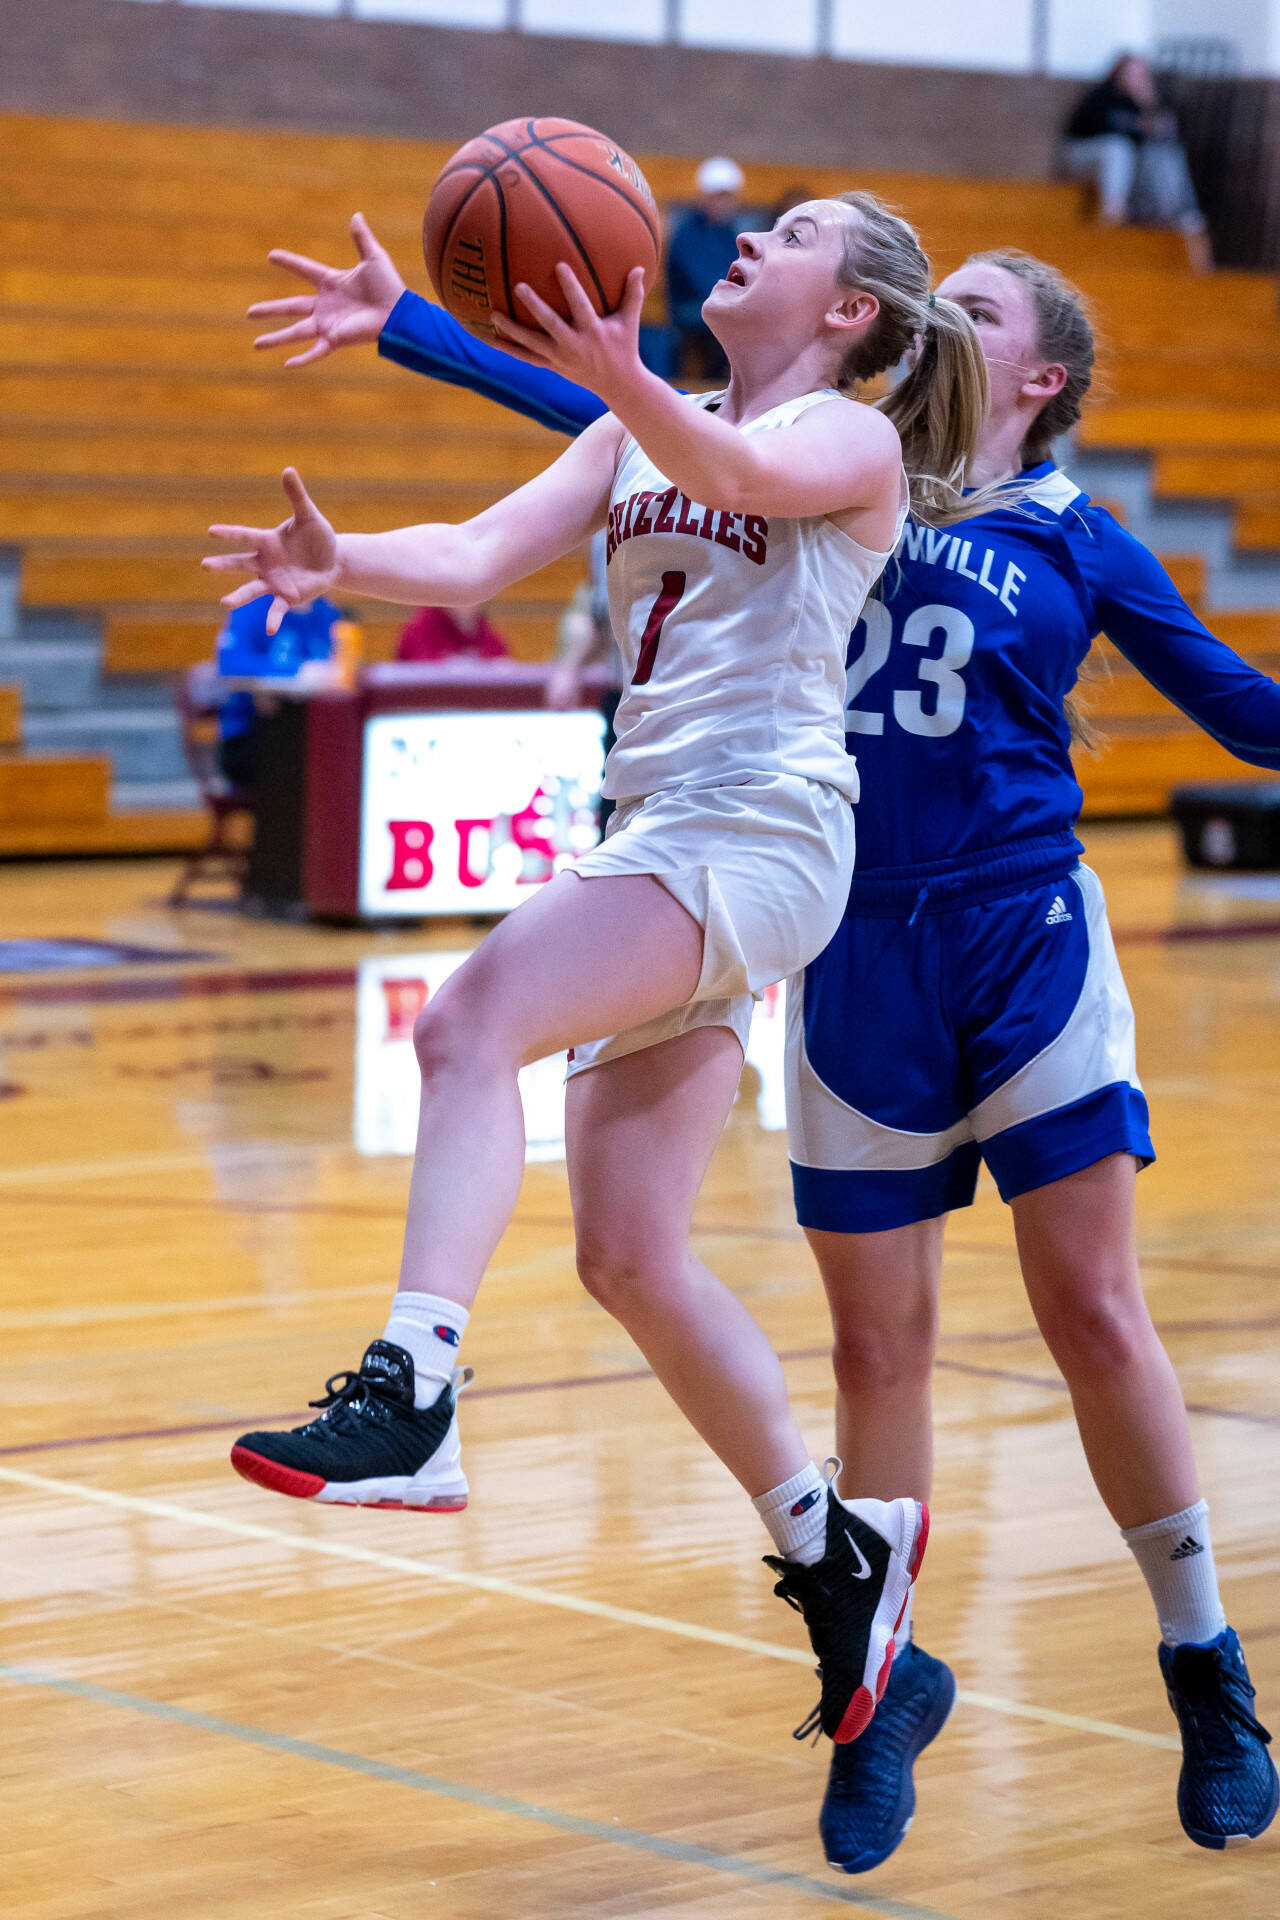 PHOTO BY FOREST WORGUM
 Hoquiam’s Graci Bonney-Spradlin (1) glides to the basket during the Grizzlies’ 60-39 win over Eatonville in a 1A District 4 elimination game on Wednesday in Montesano.